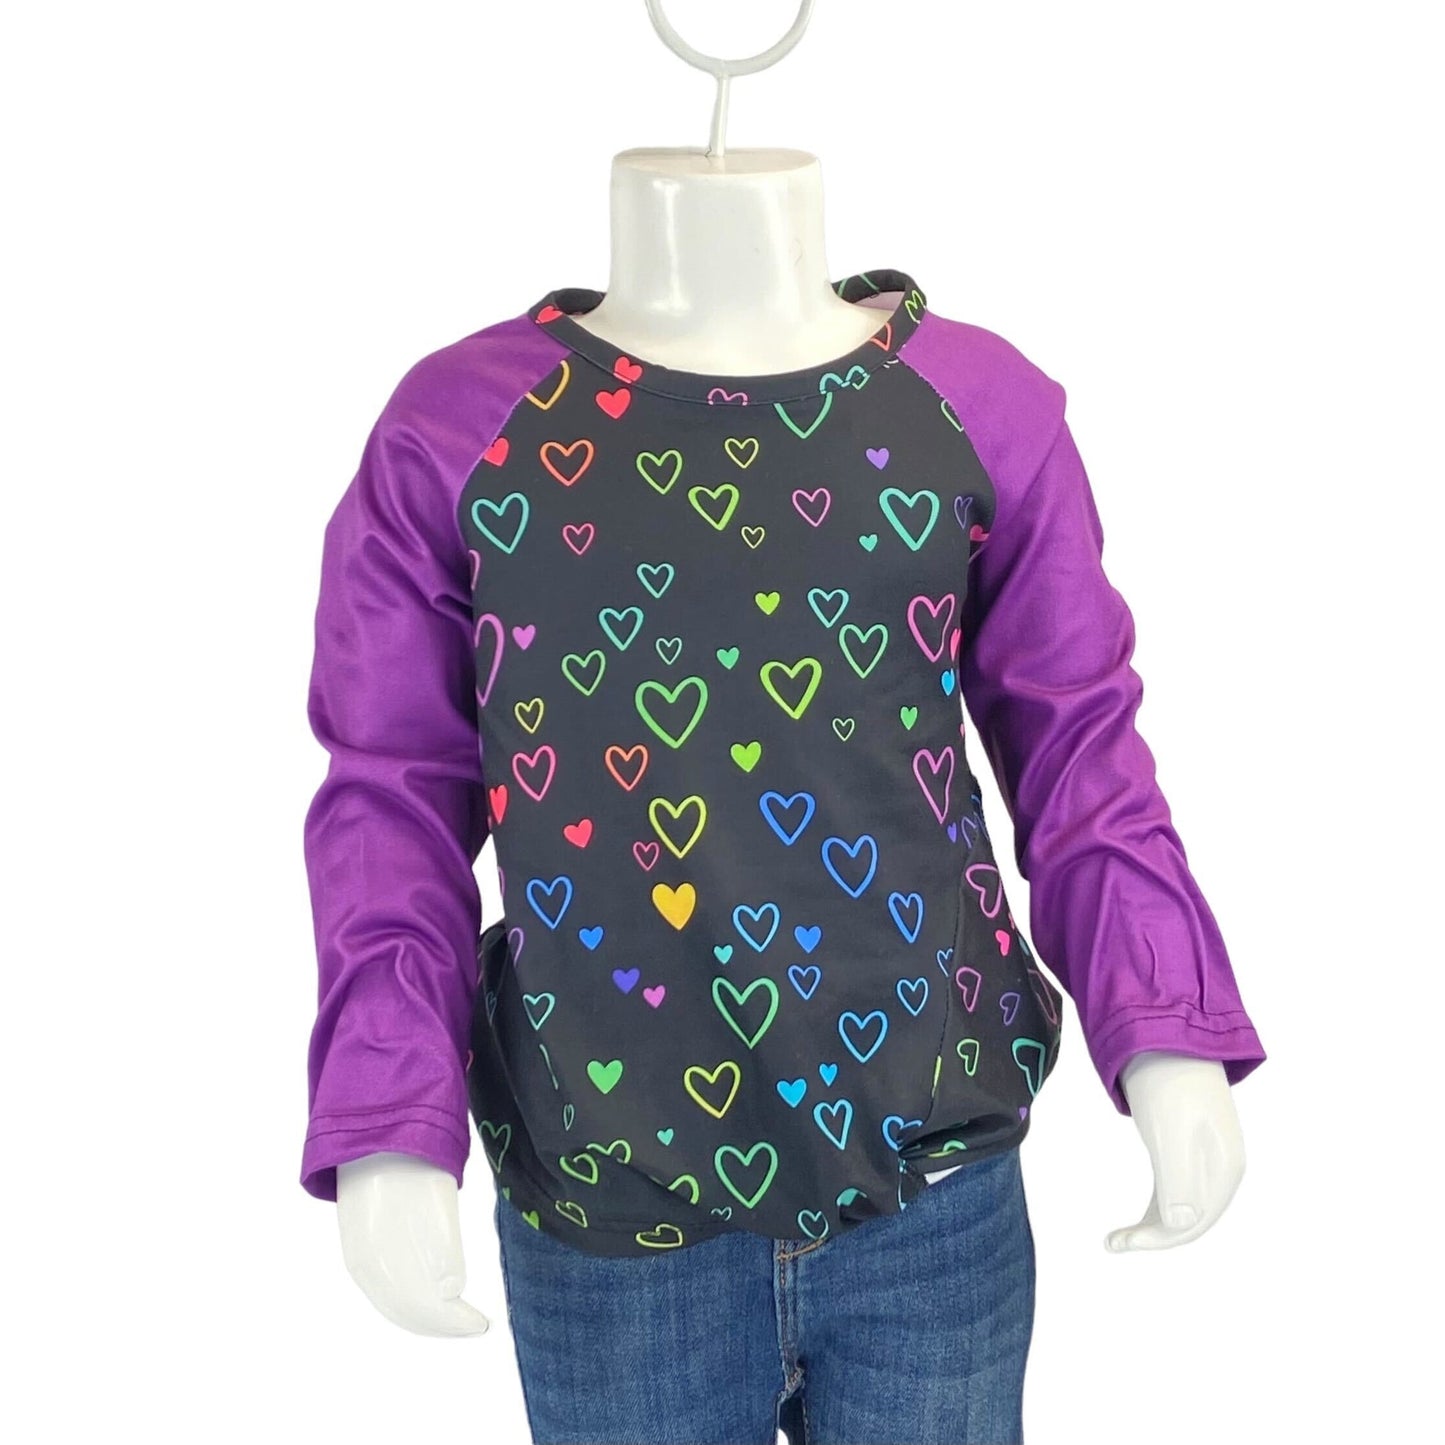 Colorful Hearts Shirt with Purple Sleeves